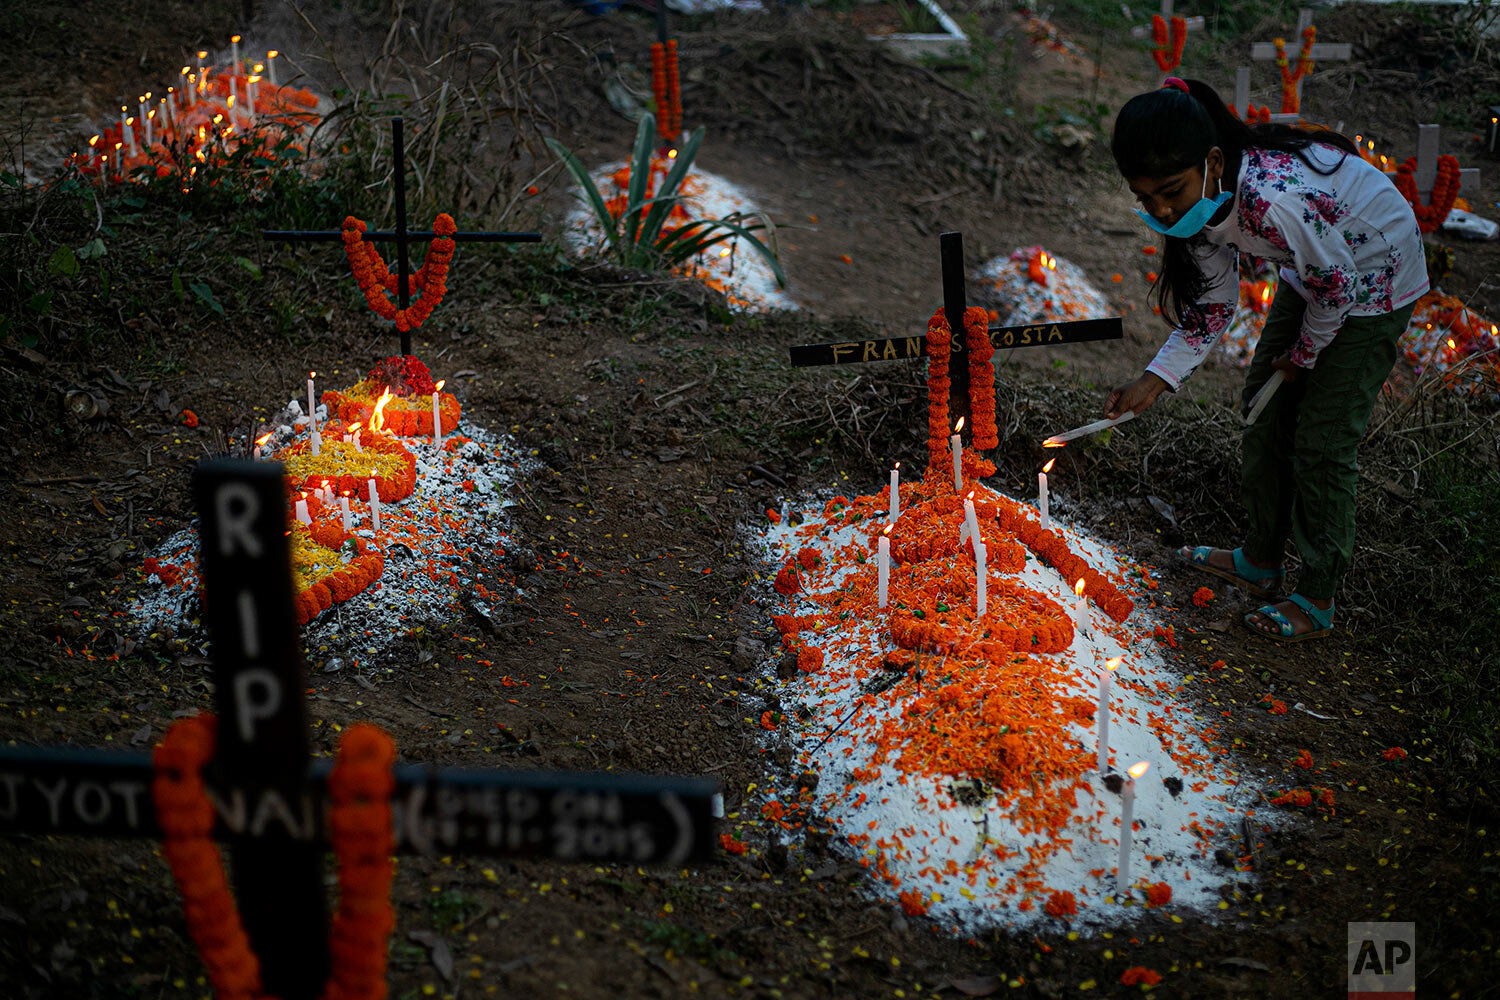  A girl wearing a face mask as a precaution against the coronavirus lights a candle as she prays at the grave of a deceased relative during All Souls Day in Gauhati, India, Monday, Nov. 2, 2020. (AP Photo/Anupam Nath) 